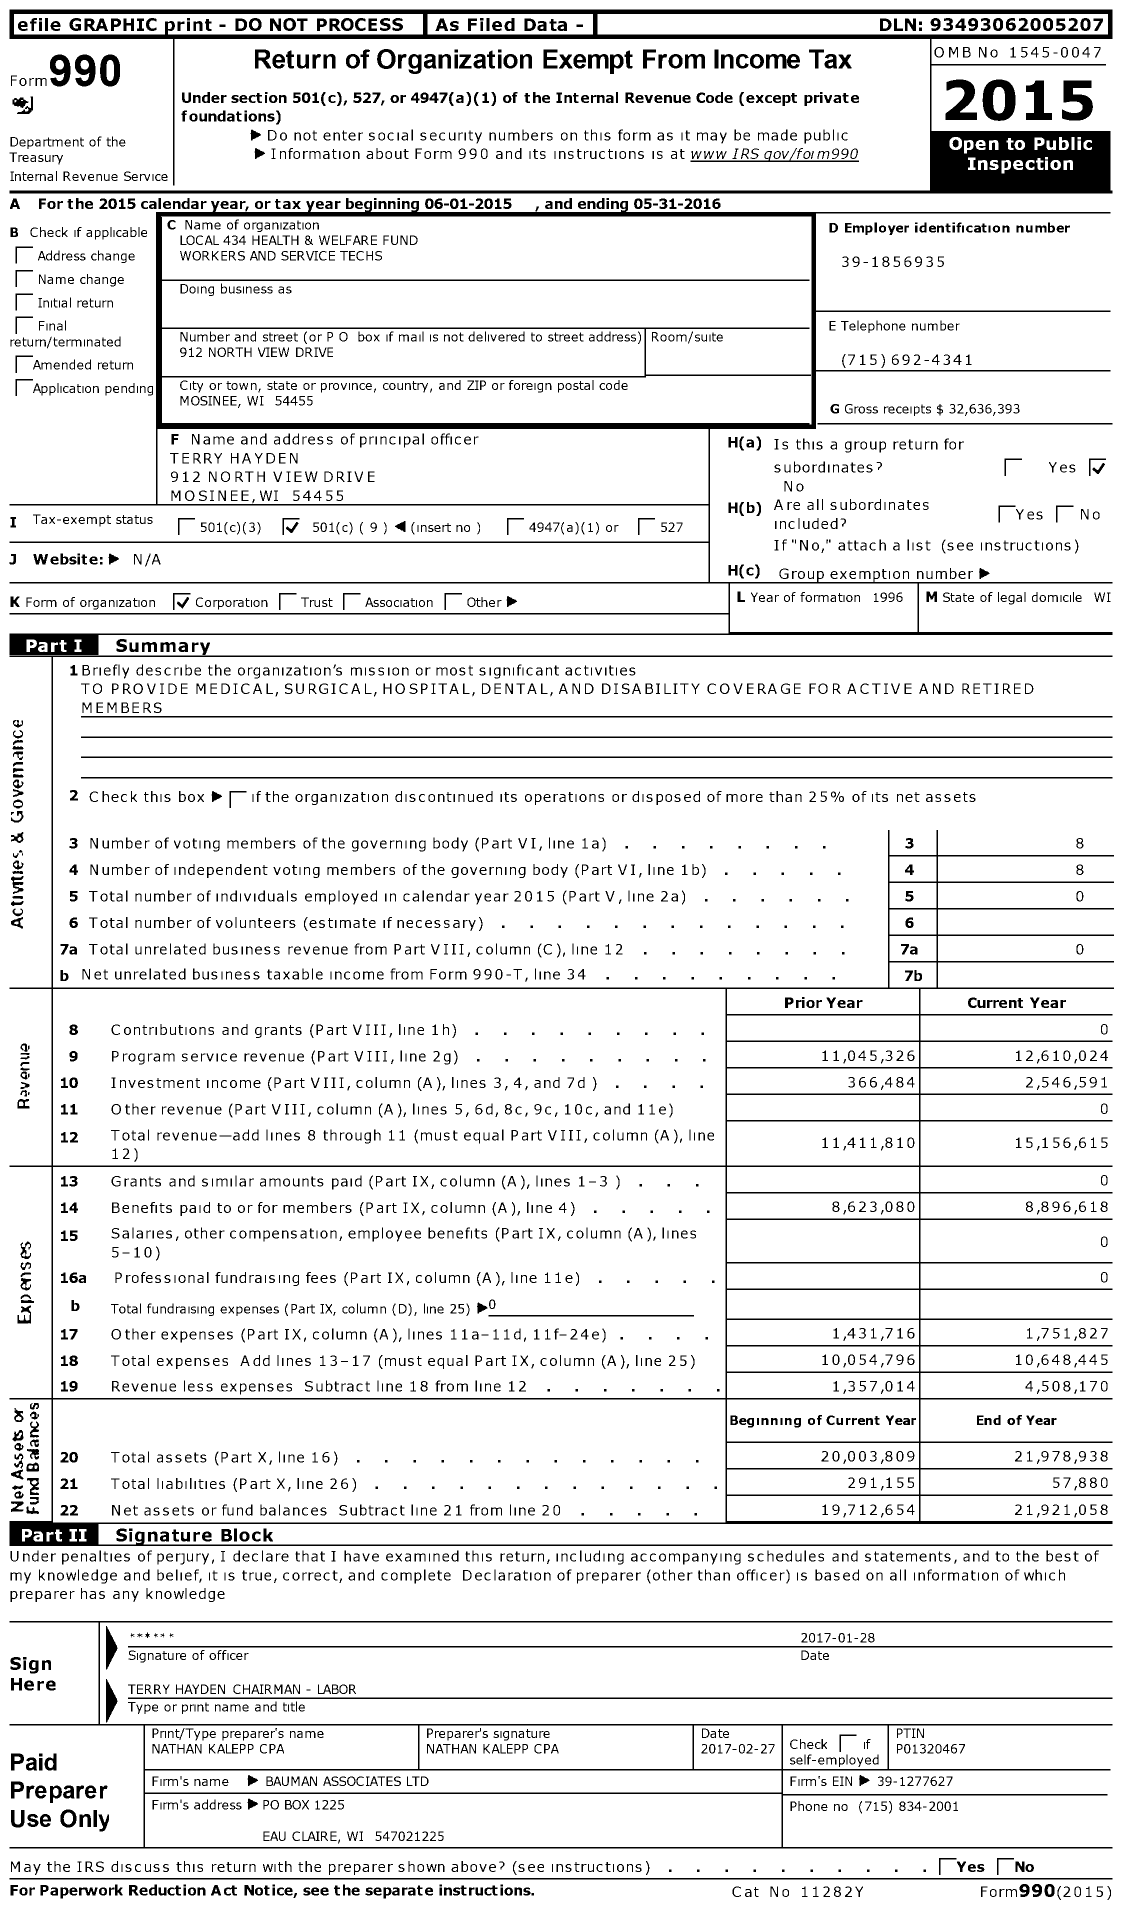 Image of first page of 2015 Form 990O for Local 434 Health and Welfare Fund Workers and Service Techs